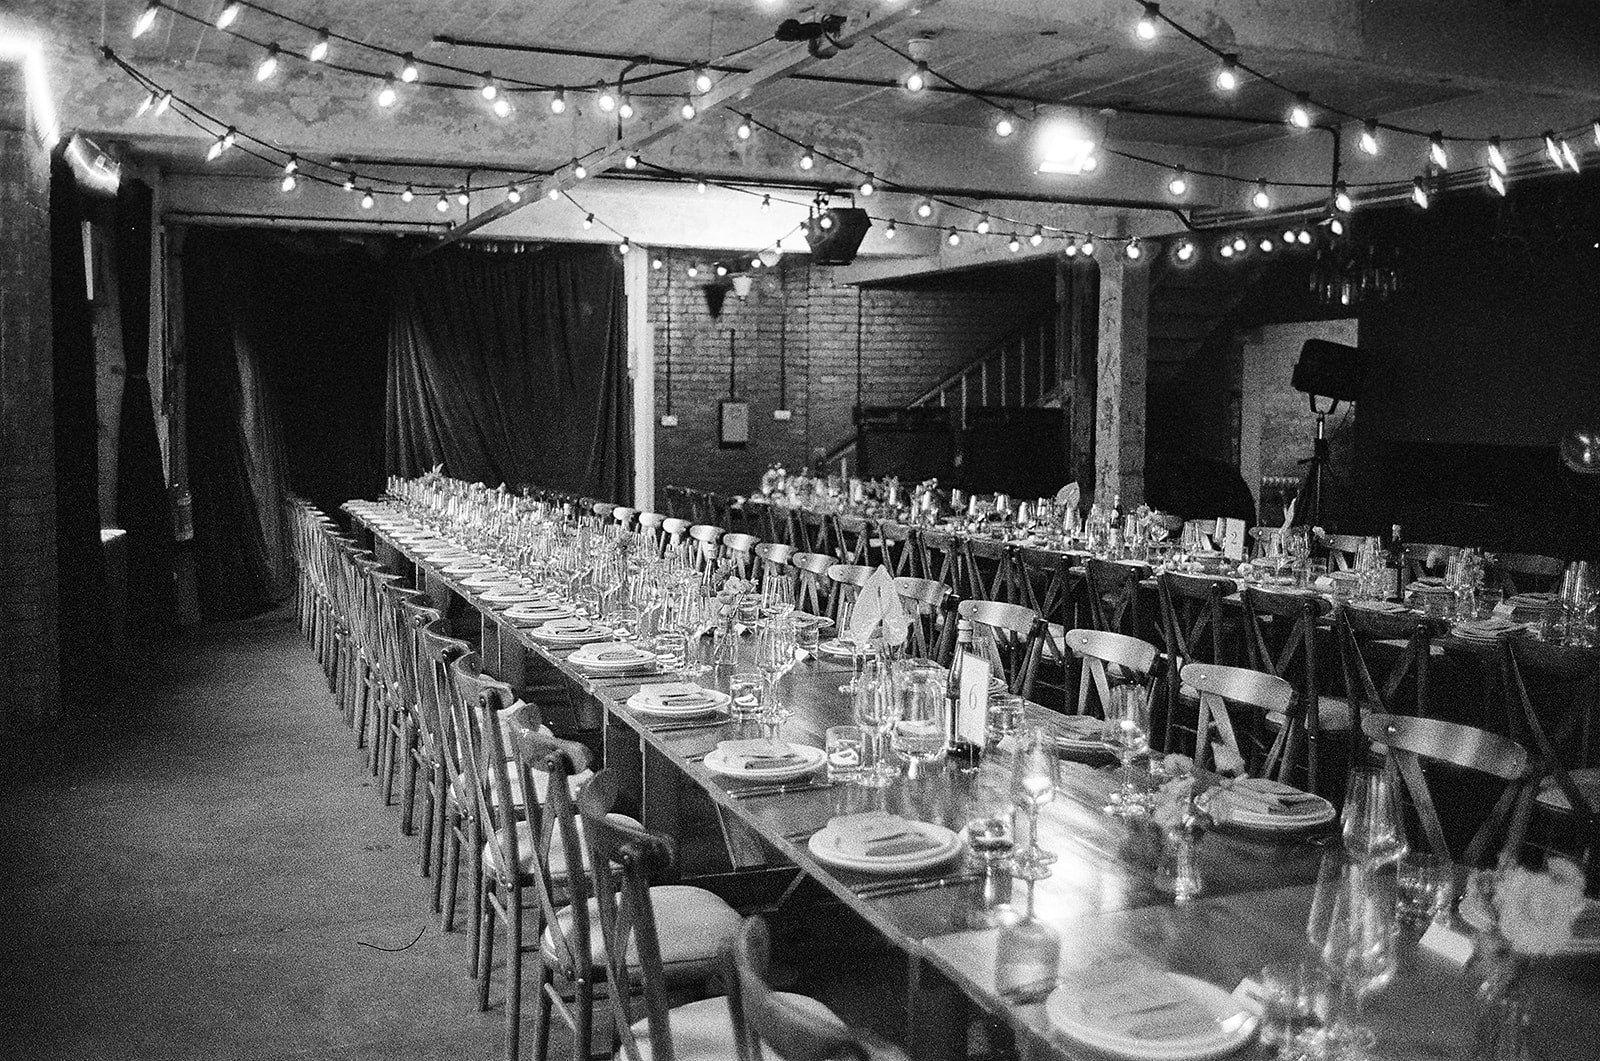 table details at One Friendly place - black and white 35mm film photography at London wedding